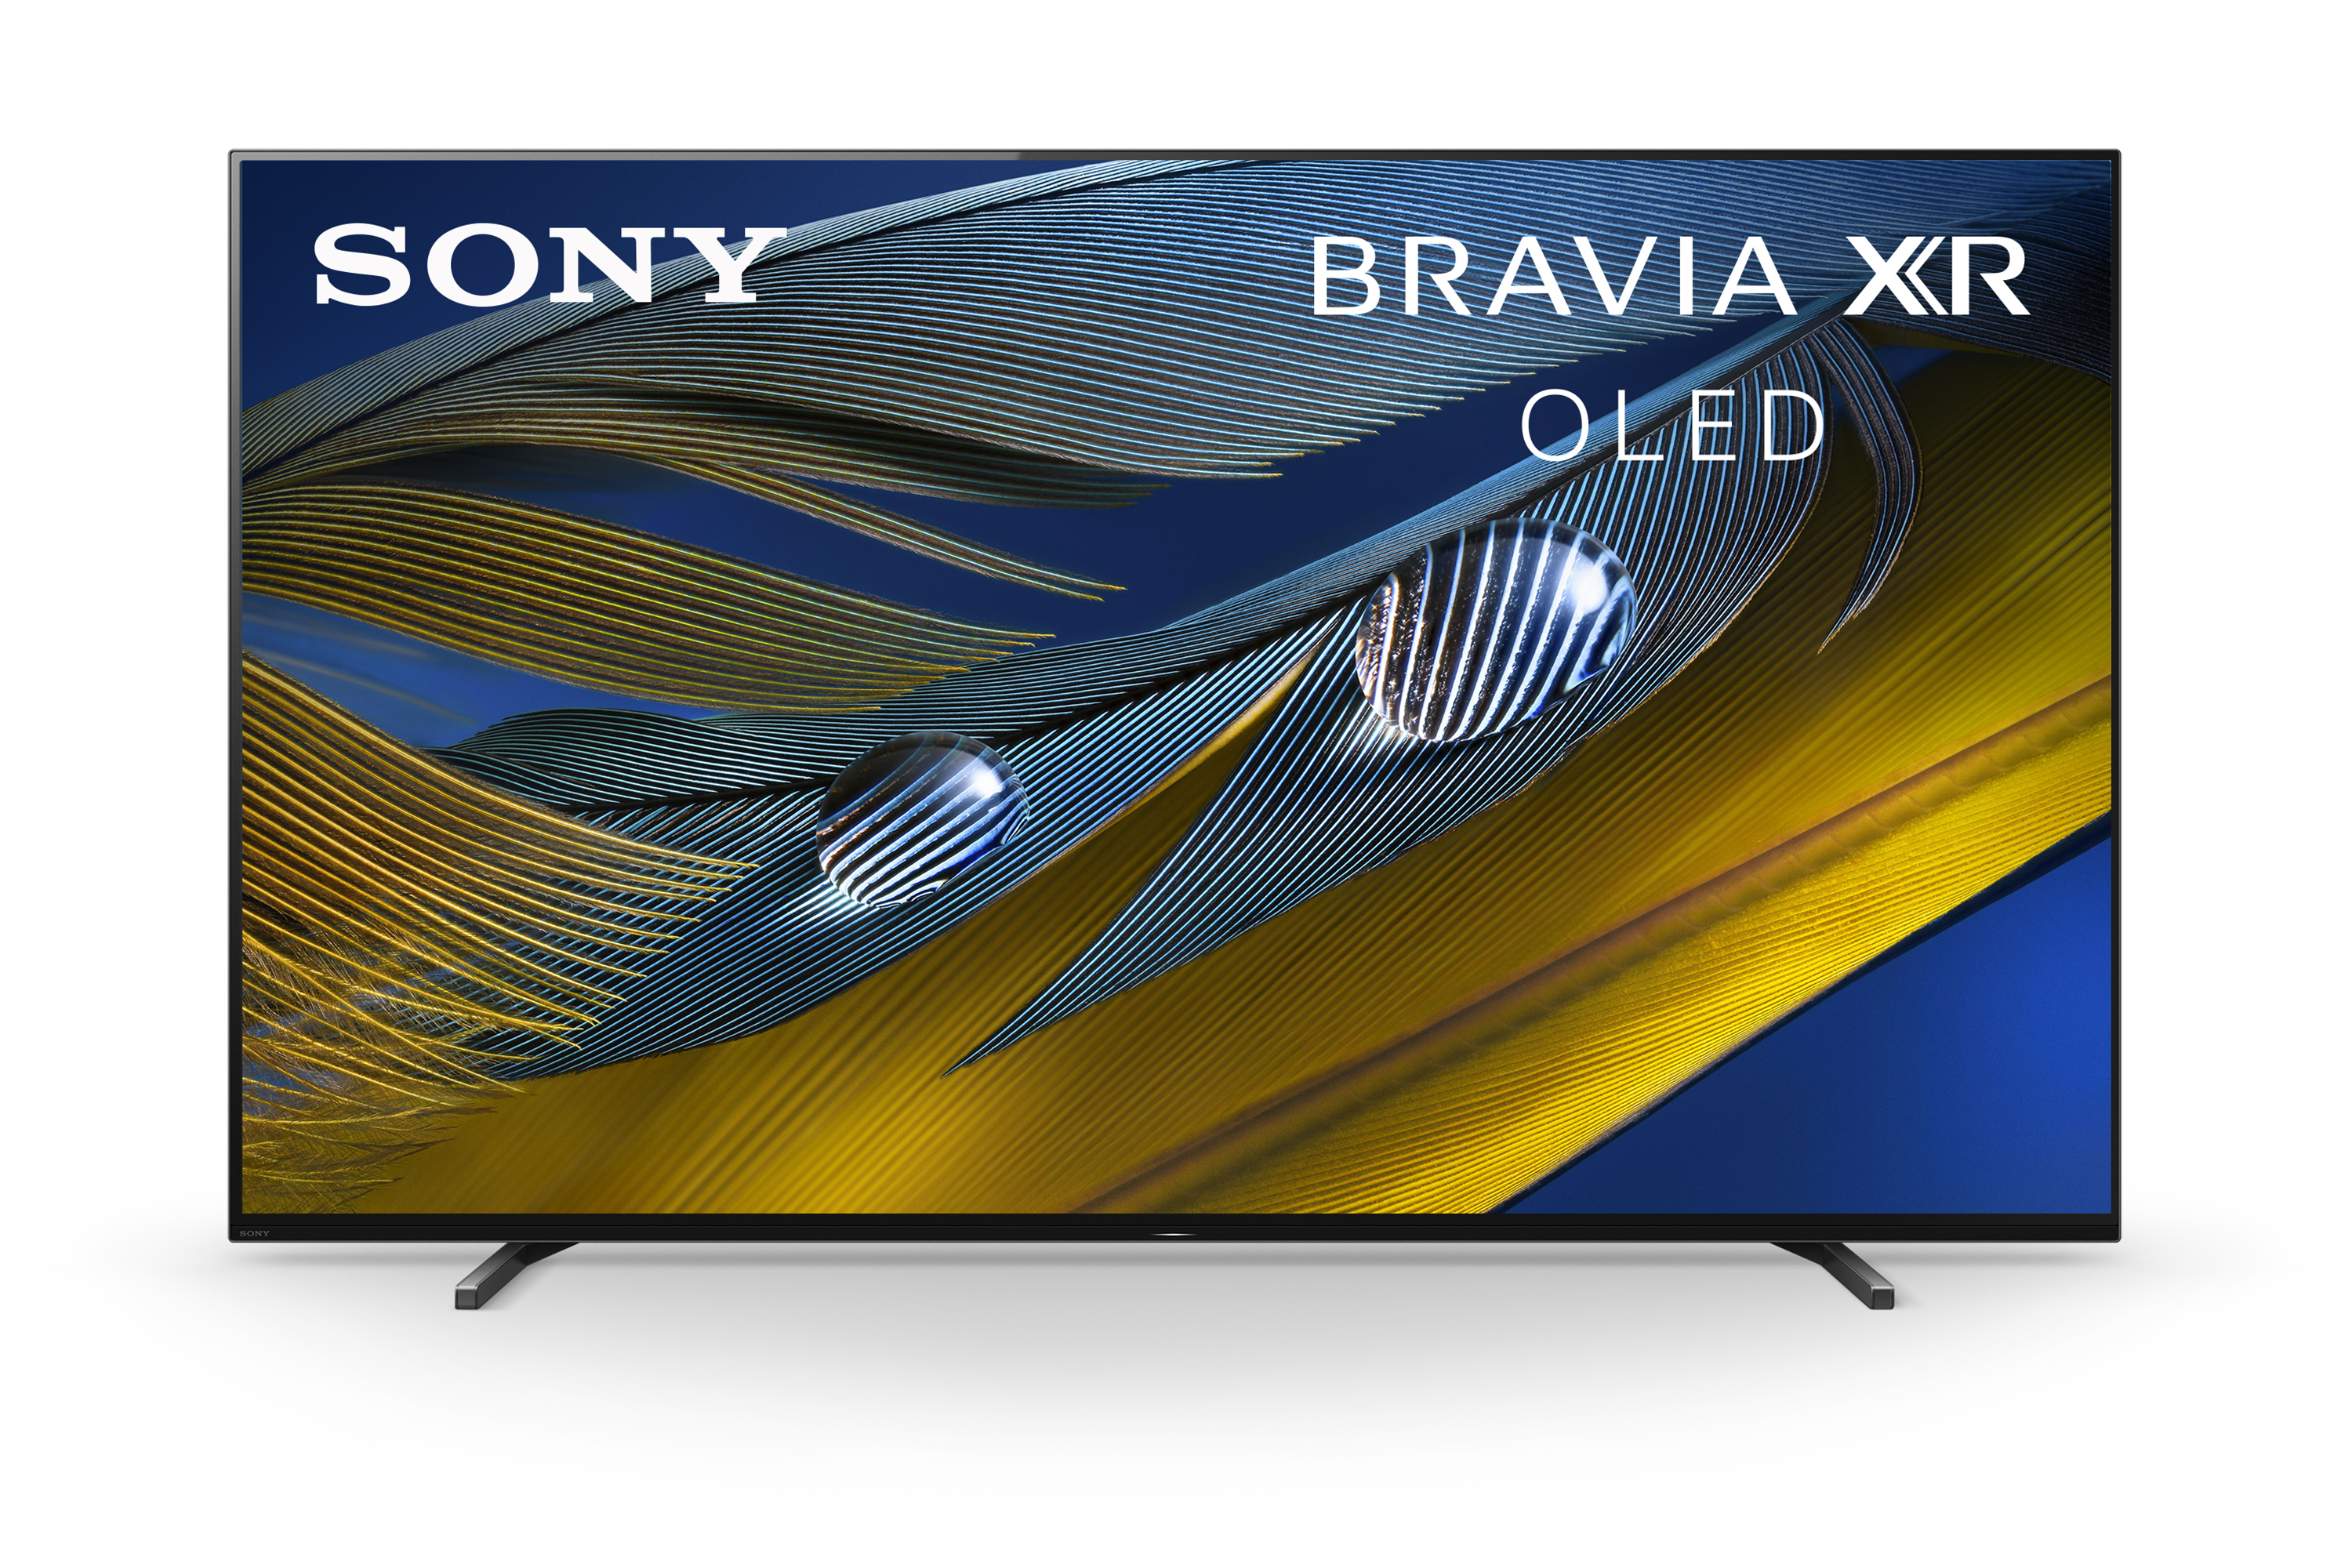 Sony 77" Class XR77A80J BRAVIA XR OLED 4K Ultra HD Smart Google TV with Dolby Vision HDR A80J Series- 2021 Model - image 1 of 21